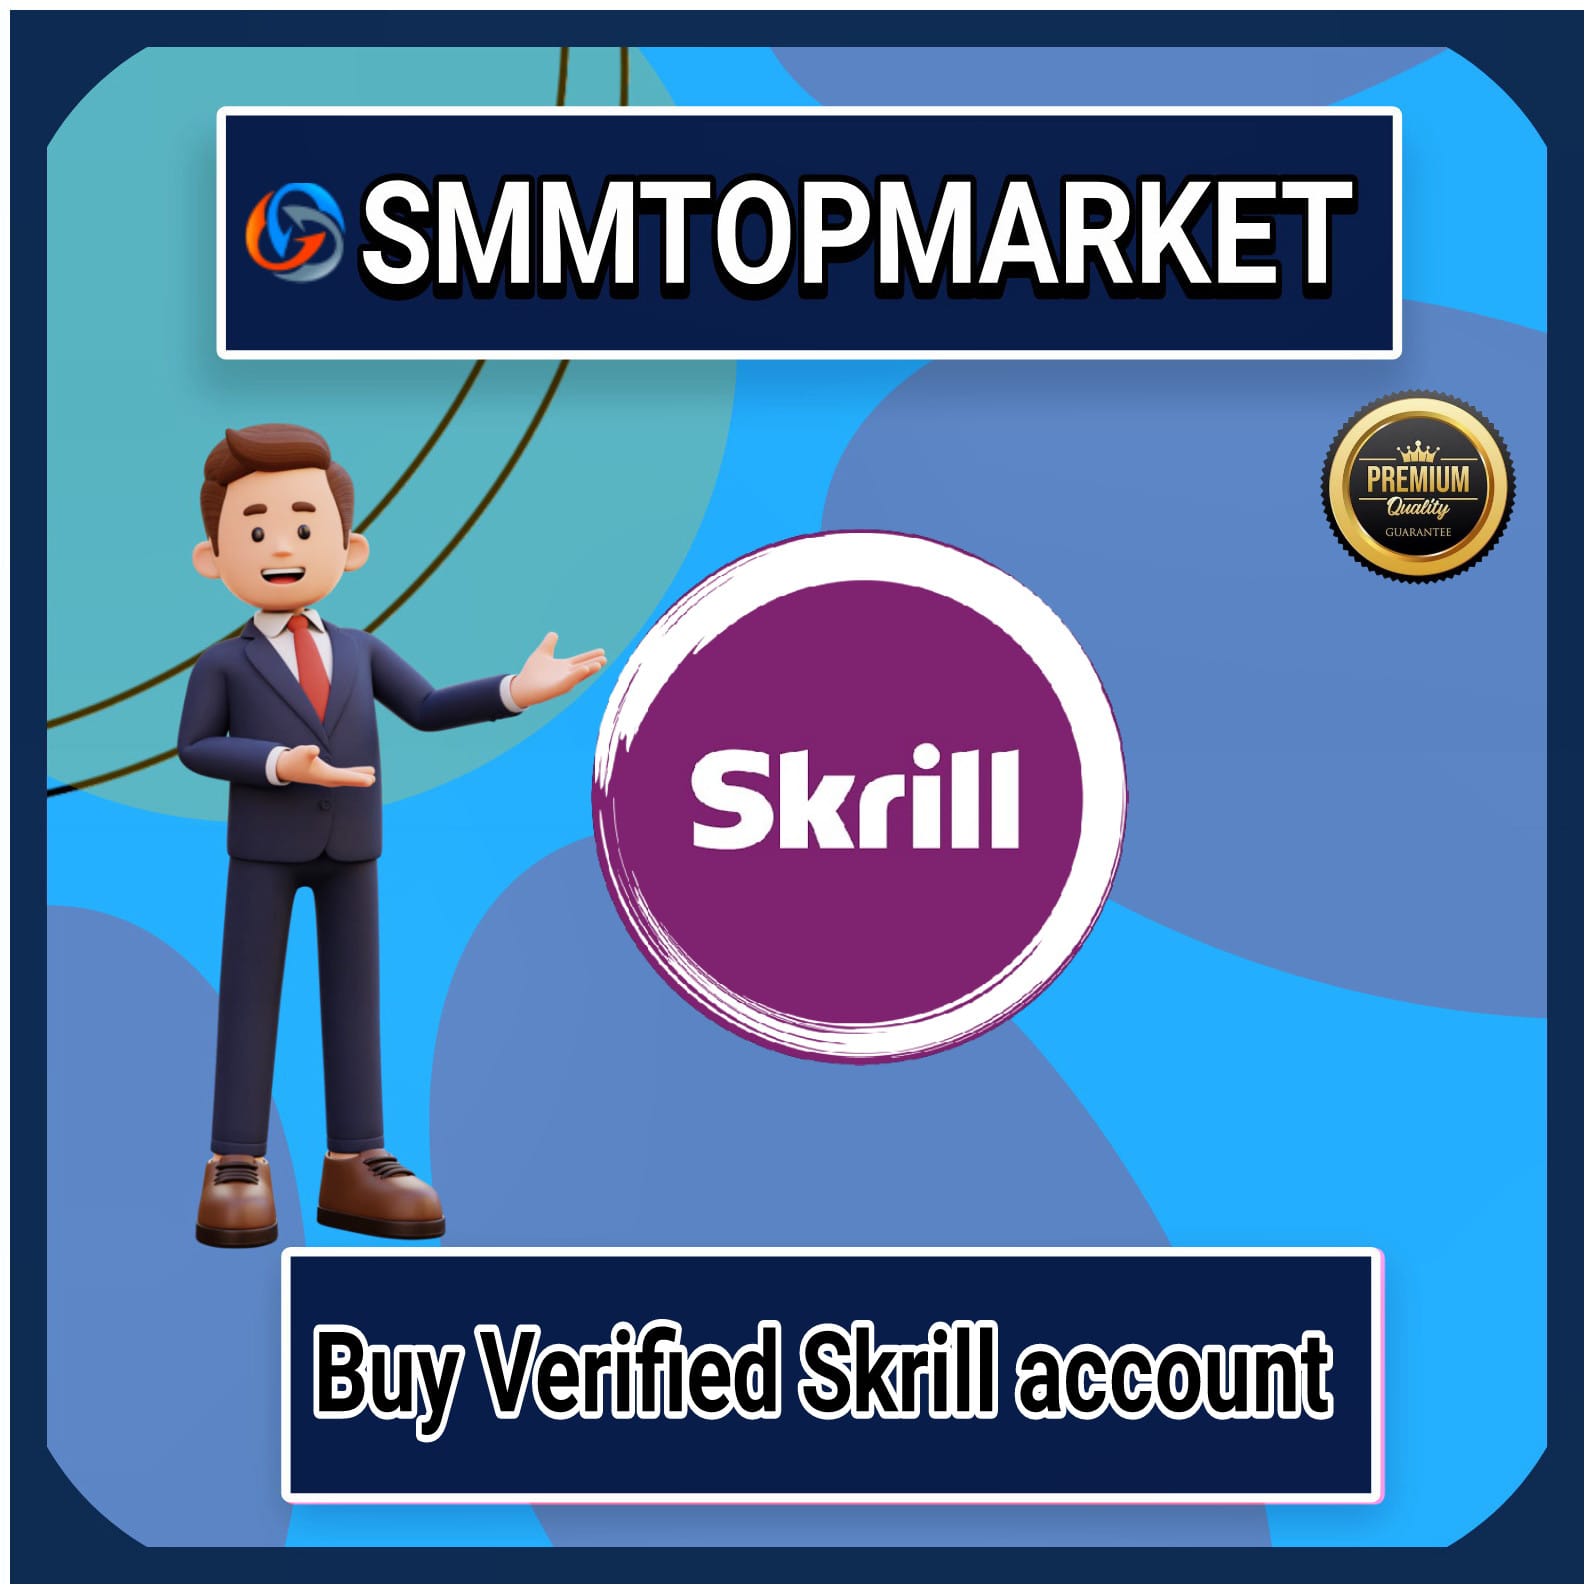 Buy Verified Skrill Account100% pasport and driving verified